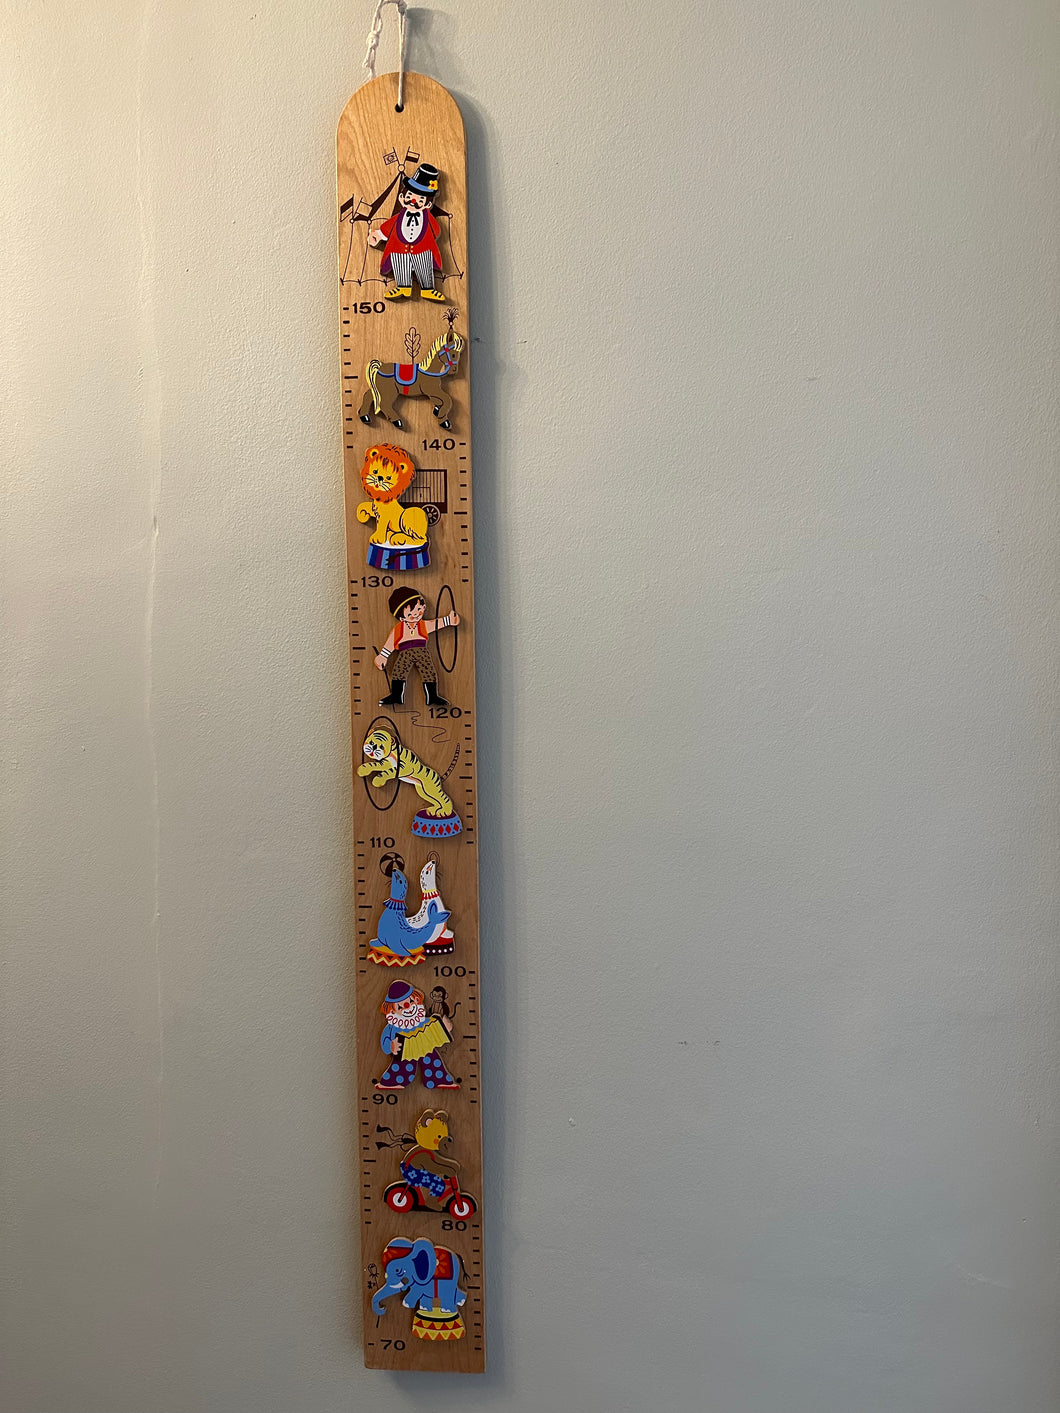 Vintage 1980s wooden German circus themed measuring stick or height chart, by Mertens Kunst - Moppet